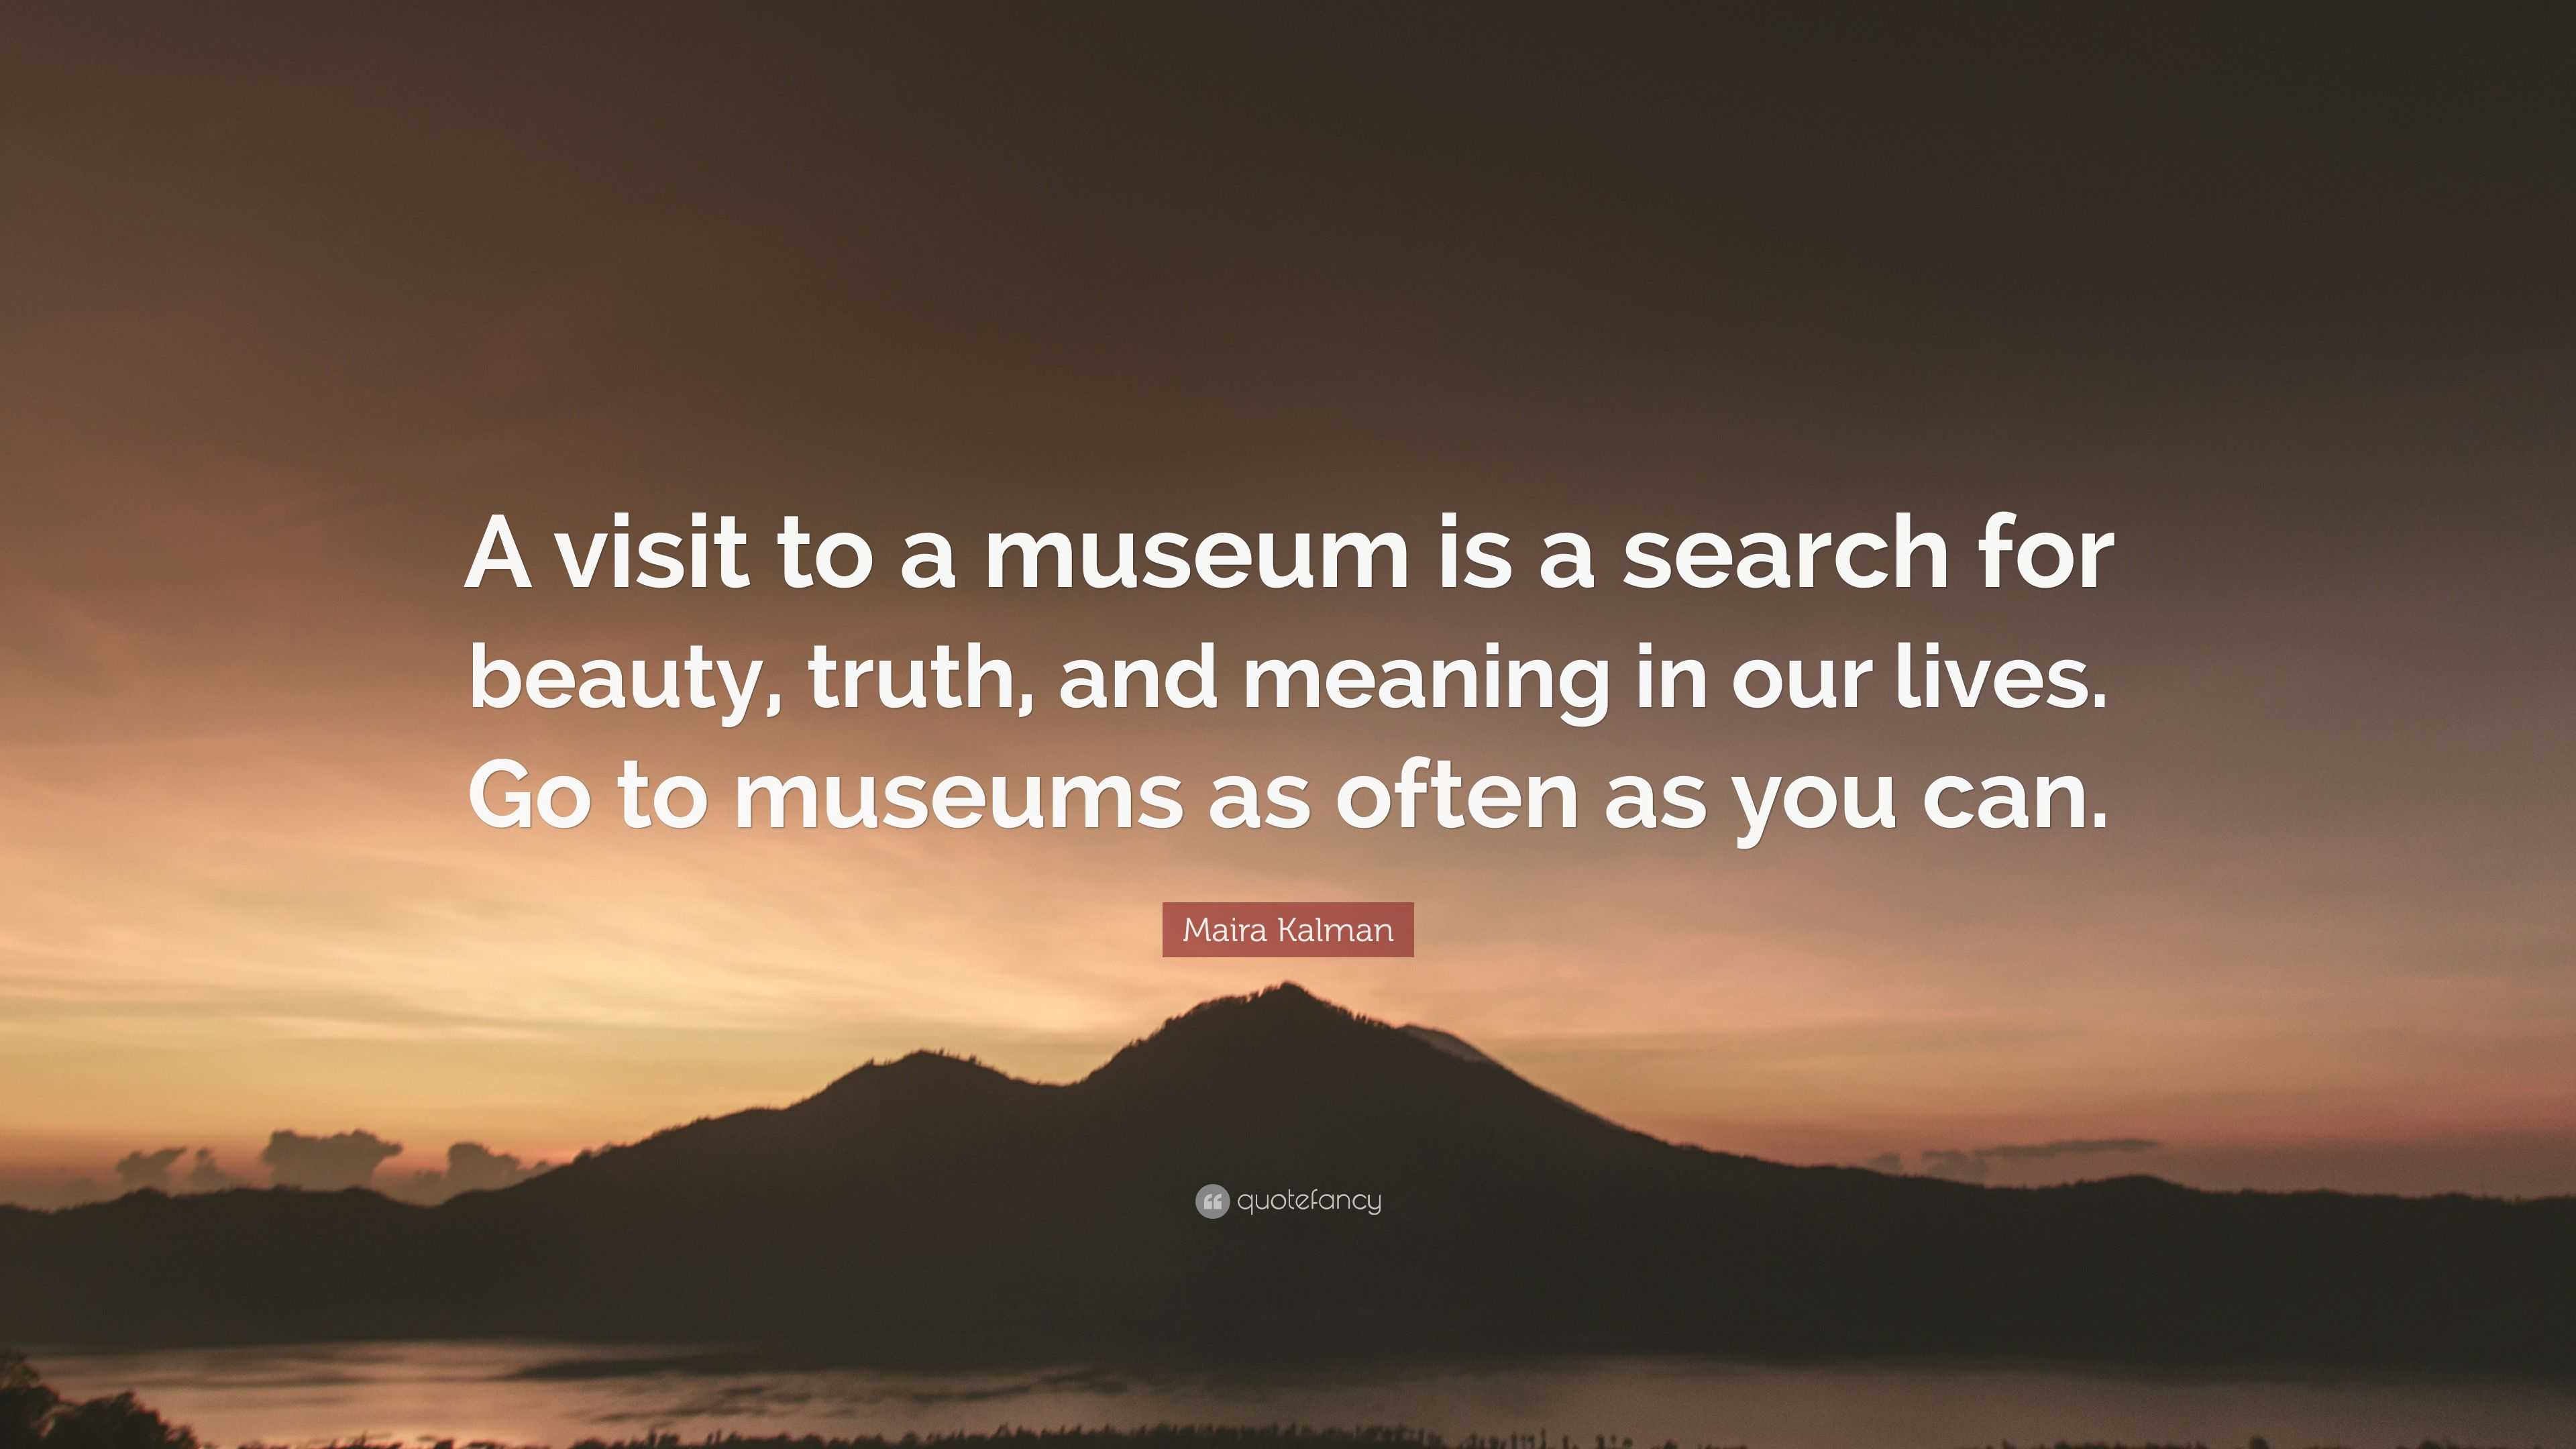 Can Museum Search